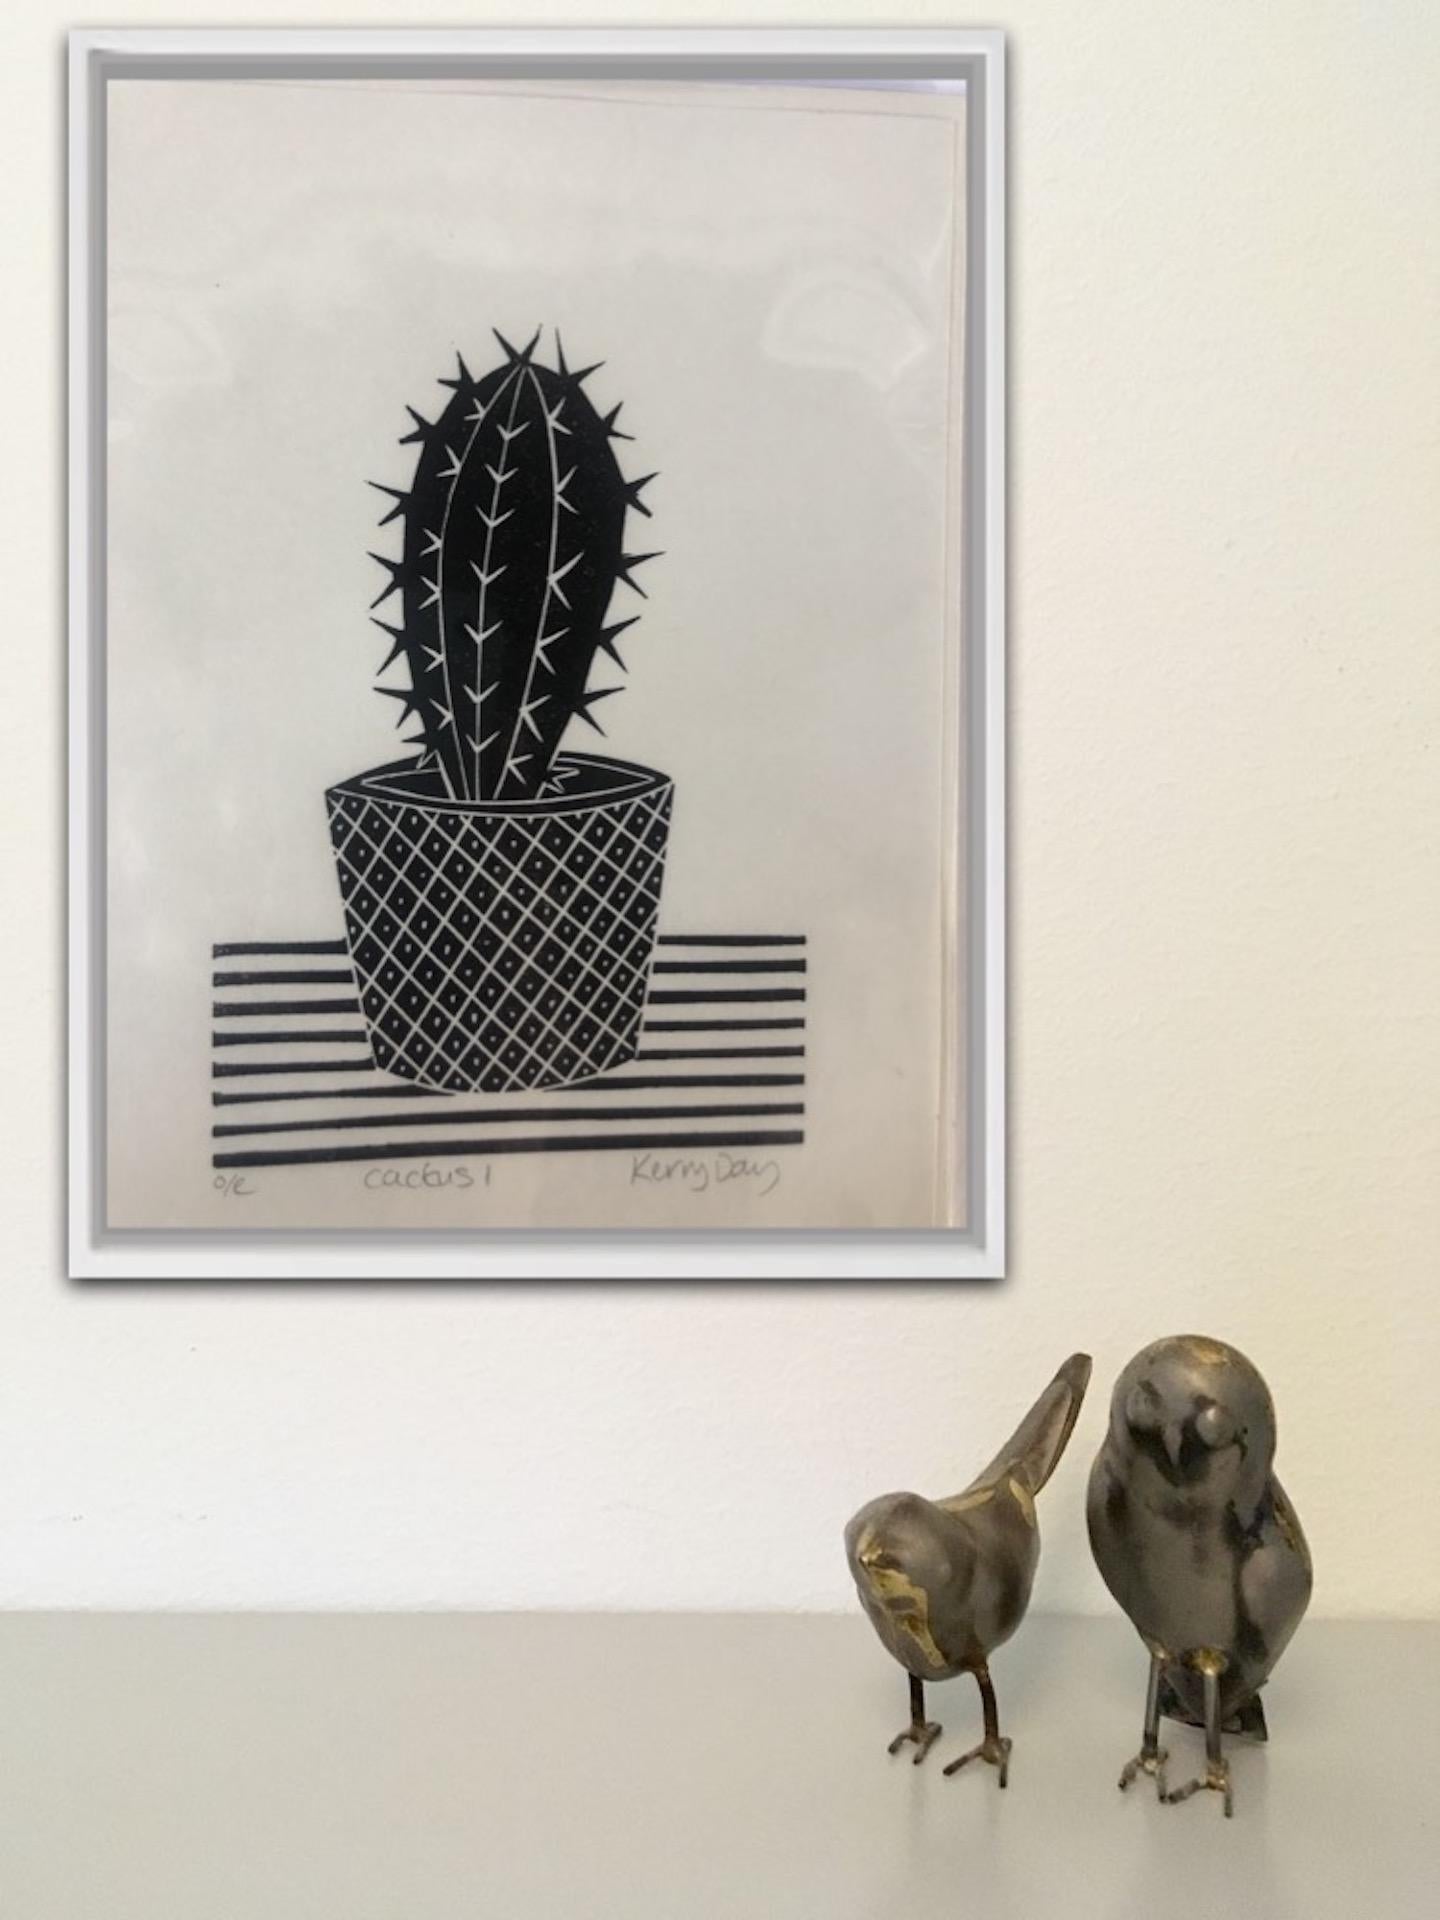 Kerry Day, Cactus I, Open Edition Print, Monochrome Print, Gift Art, Affordable  8